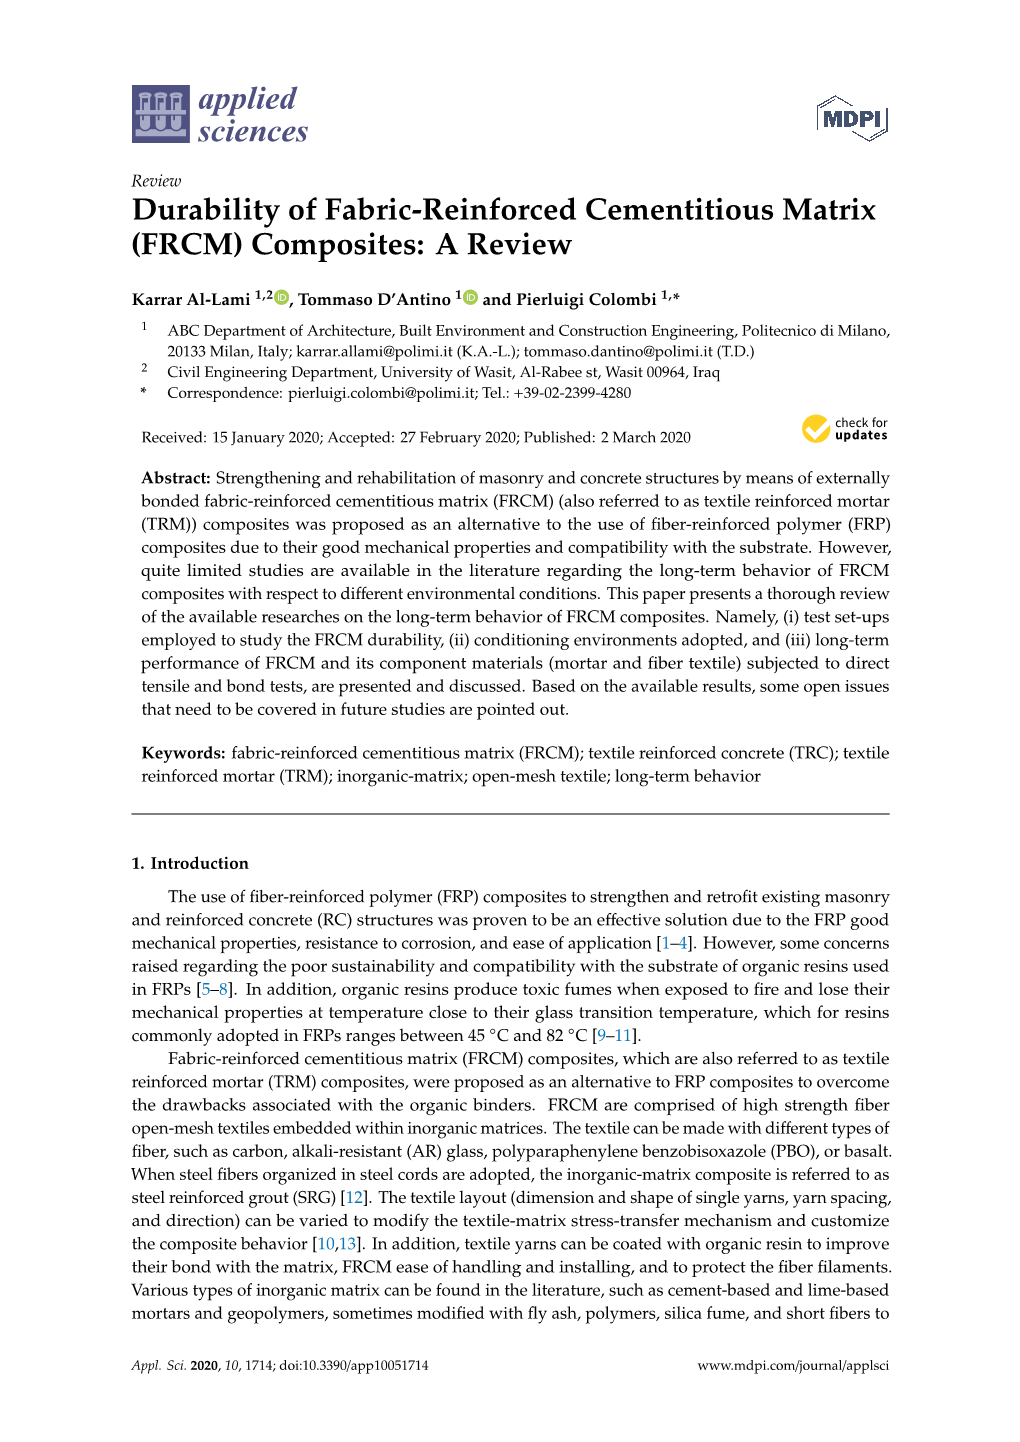 Durability of Fabric-Reinforced Cementitious Matrix (FRCM) Composites: a Review